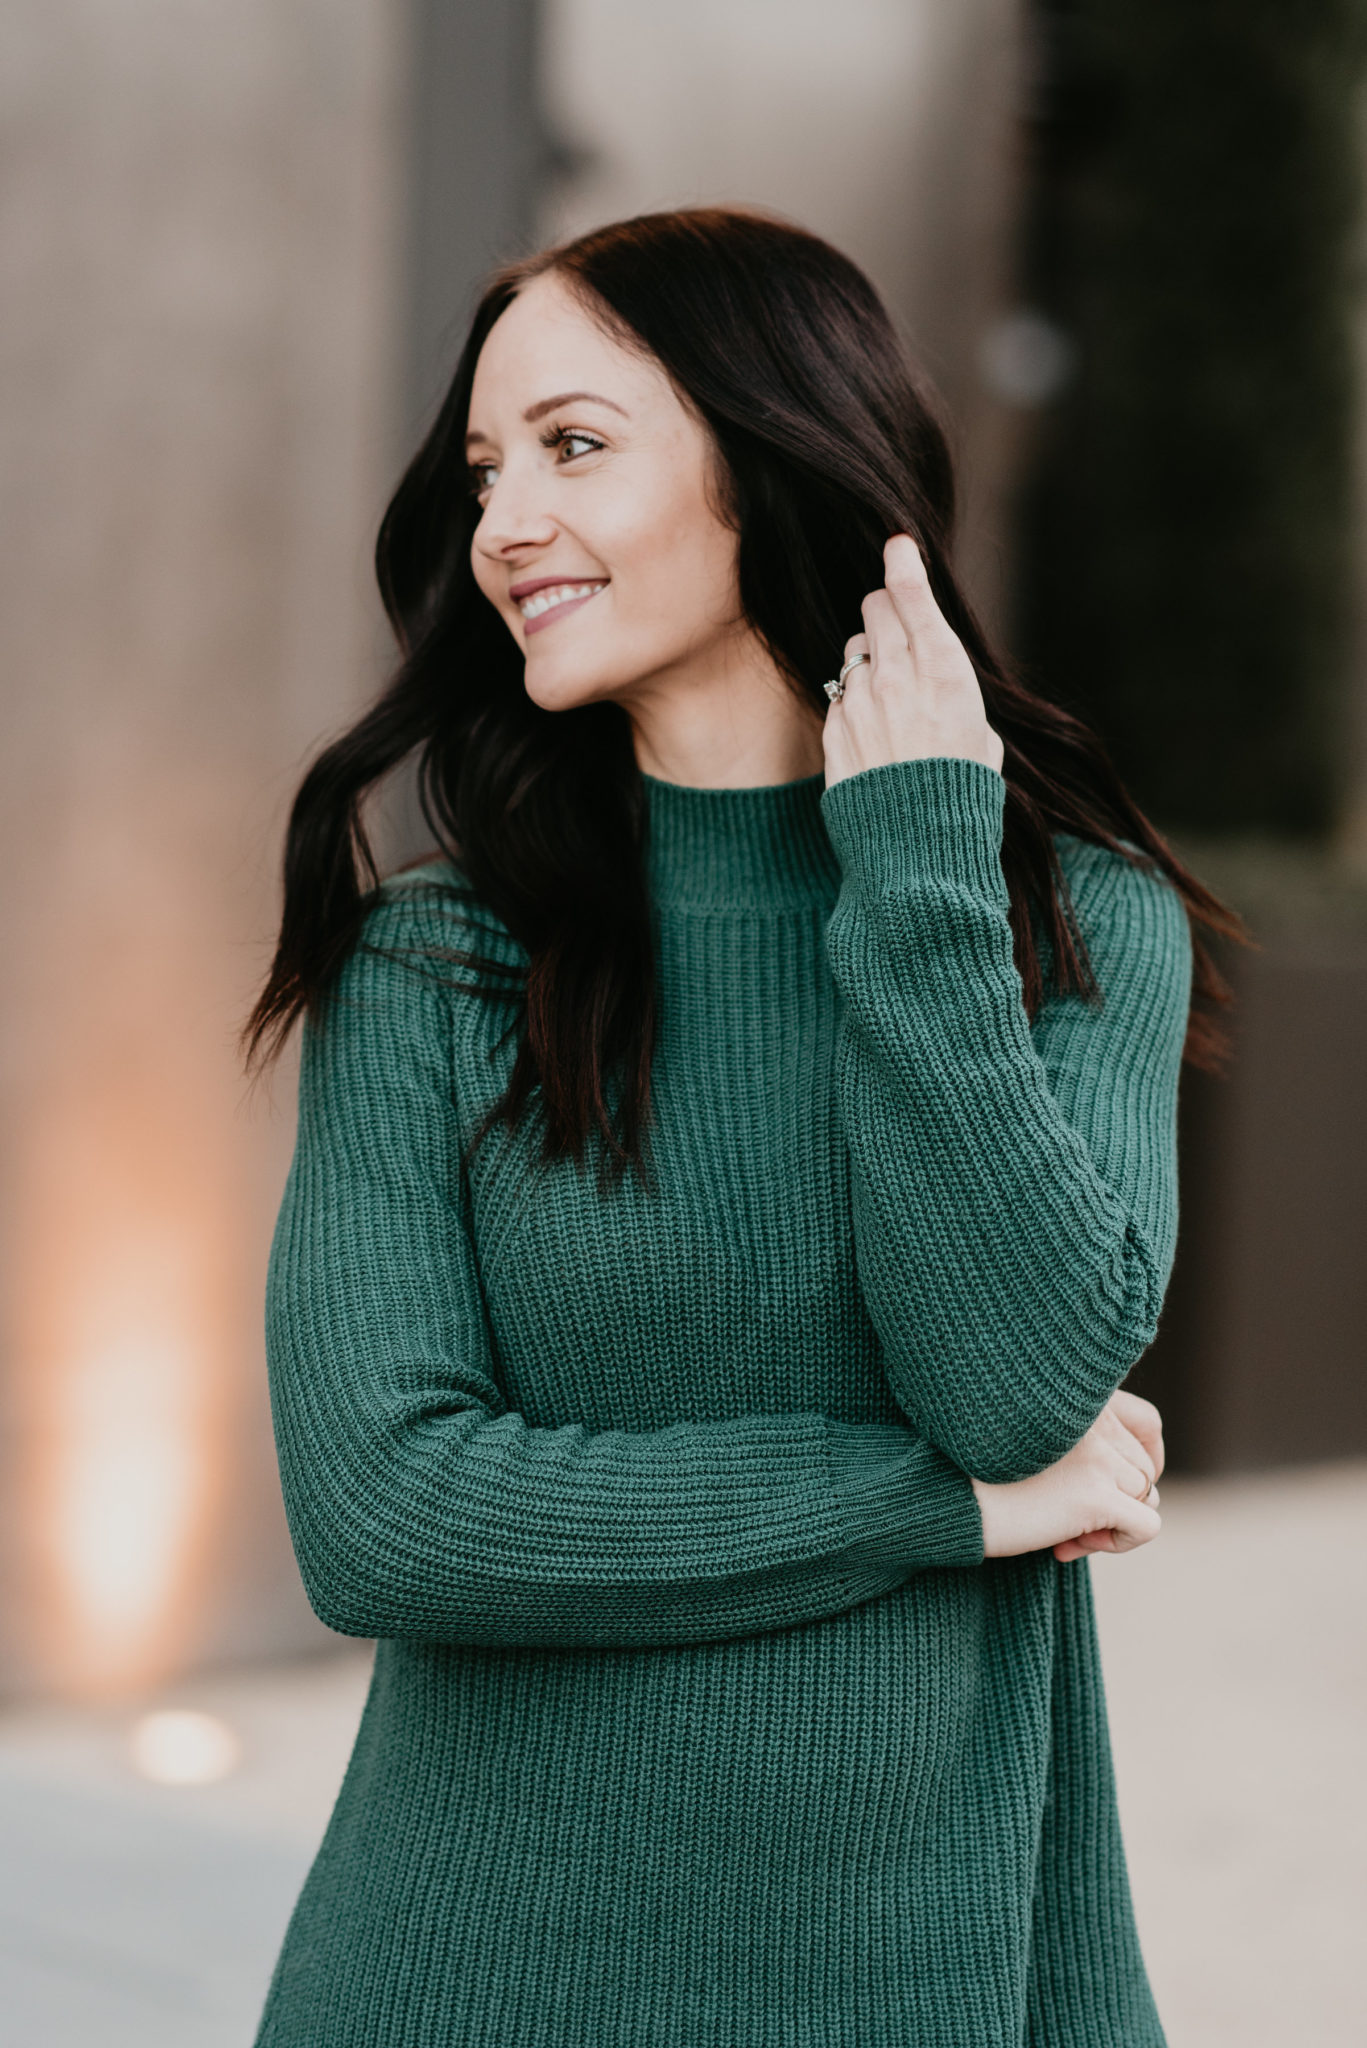 green tunic sweater and blunt brunette haircut - My Favorite Winter Sweaters All Under $50 by popular Las Vegas style blogger Outfits & Outings